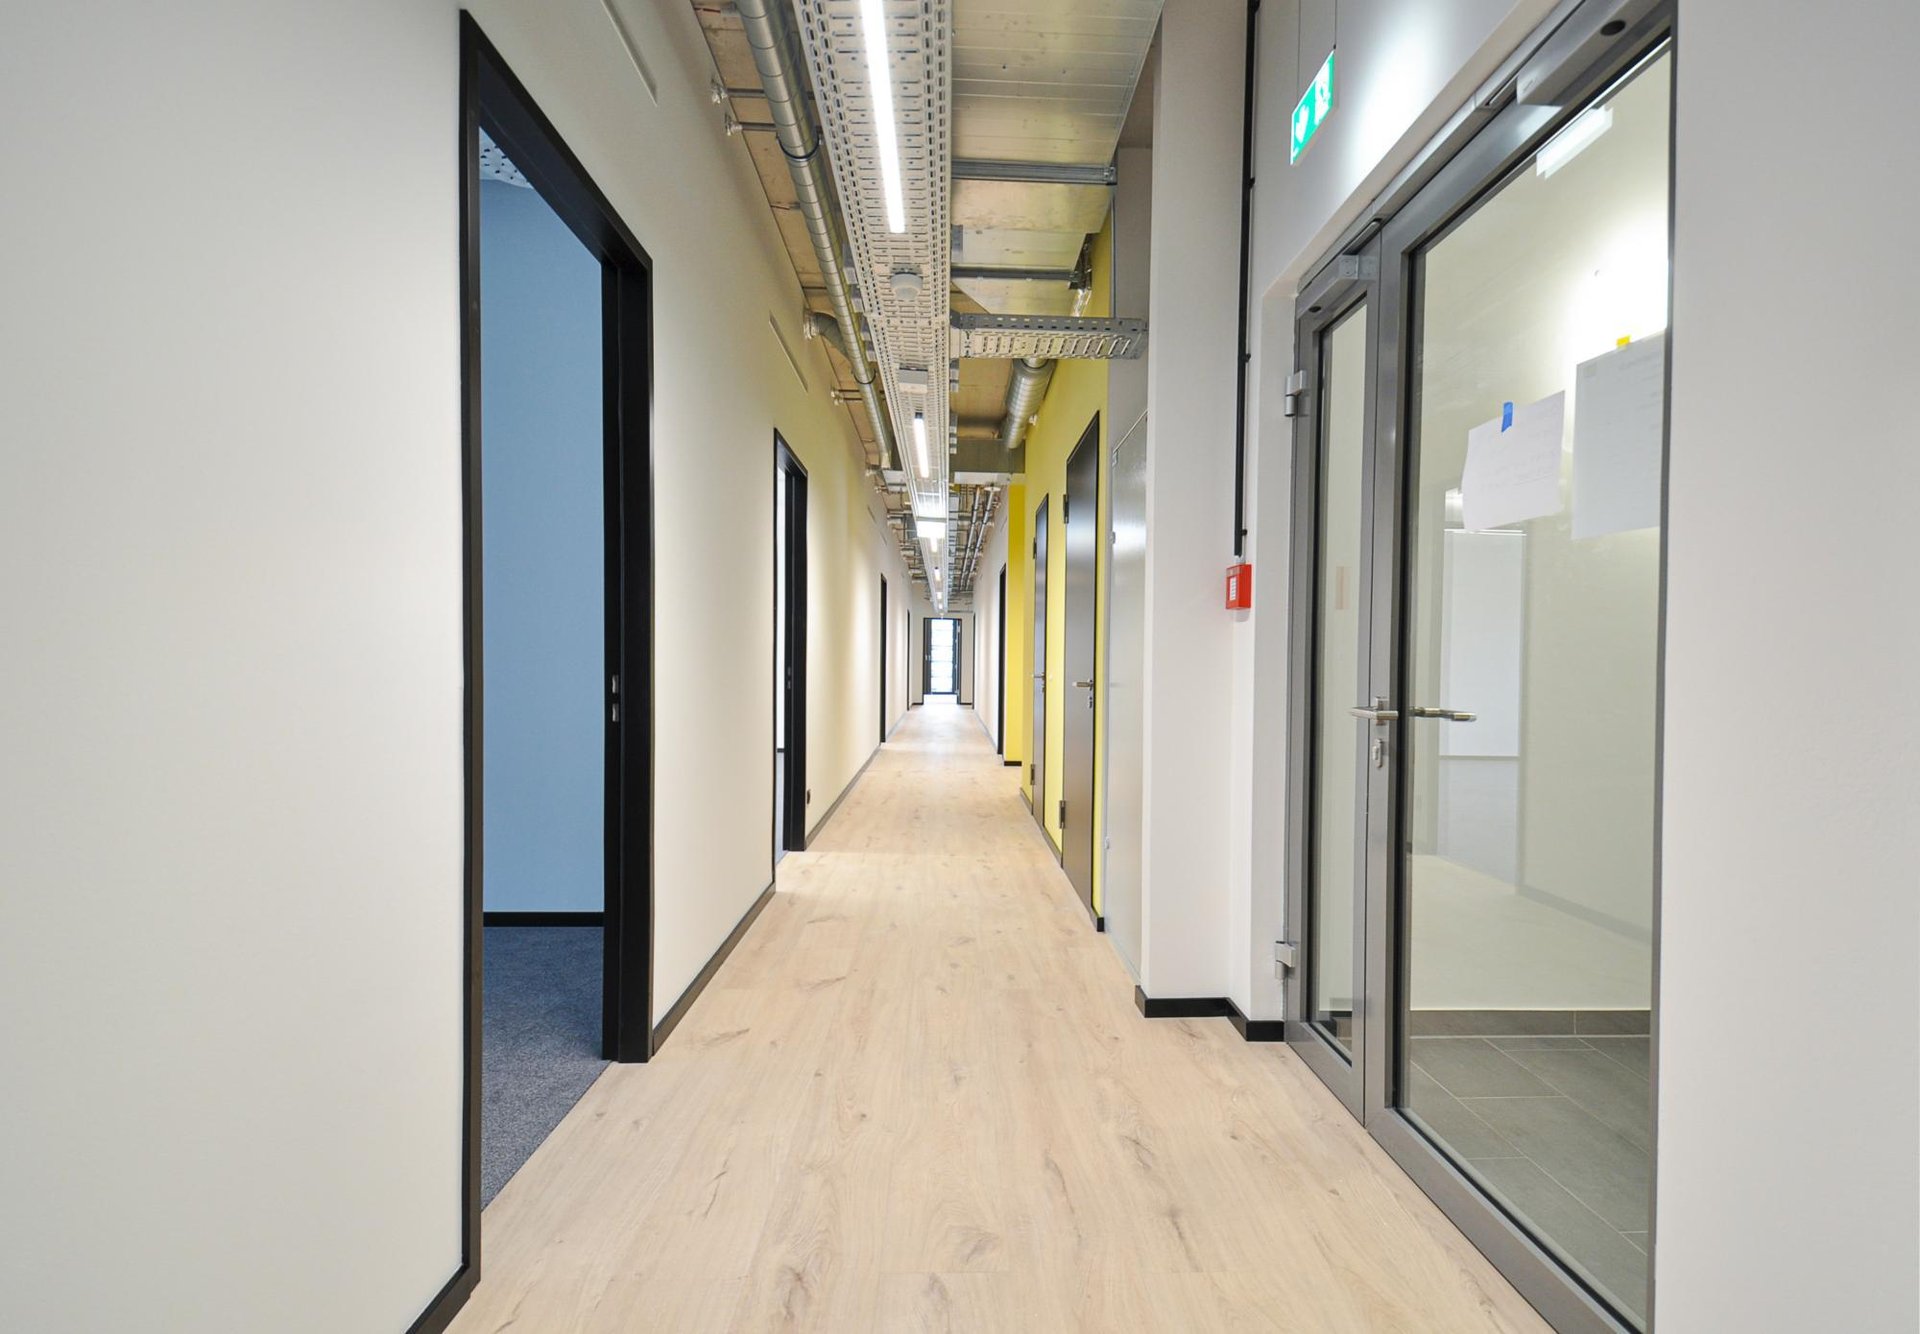 Scaling Spaces at Cuvry Campus beltere